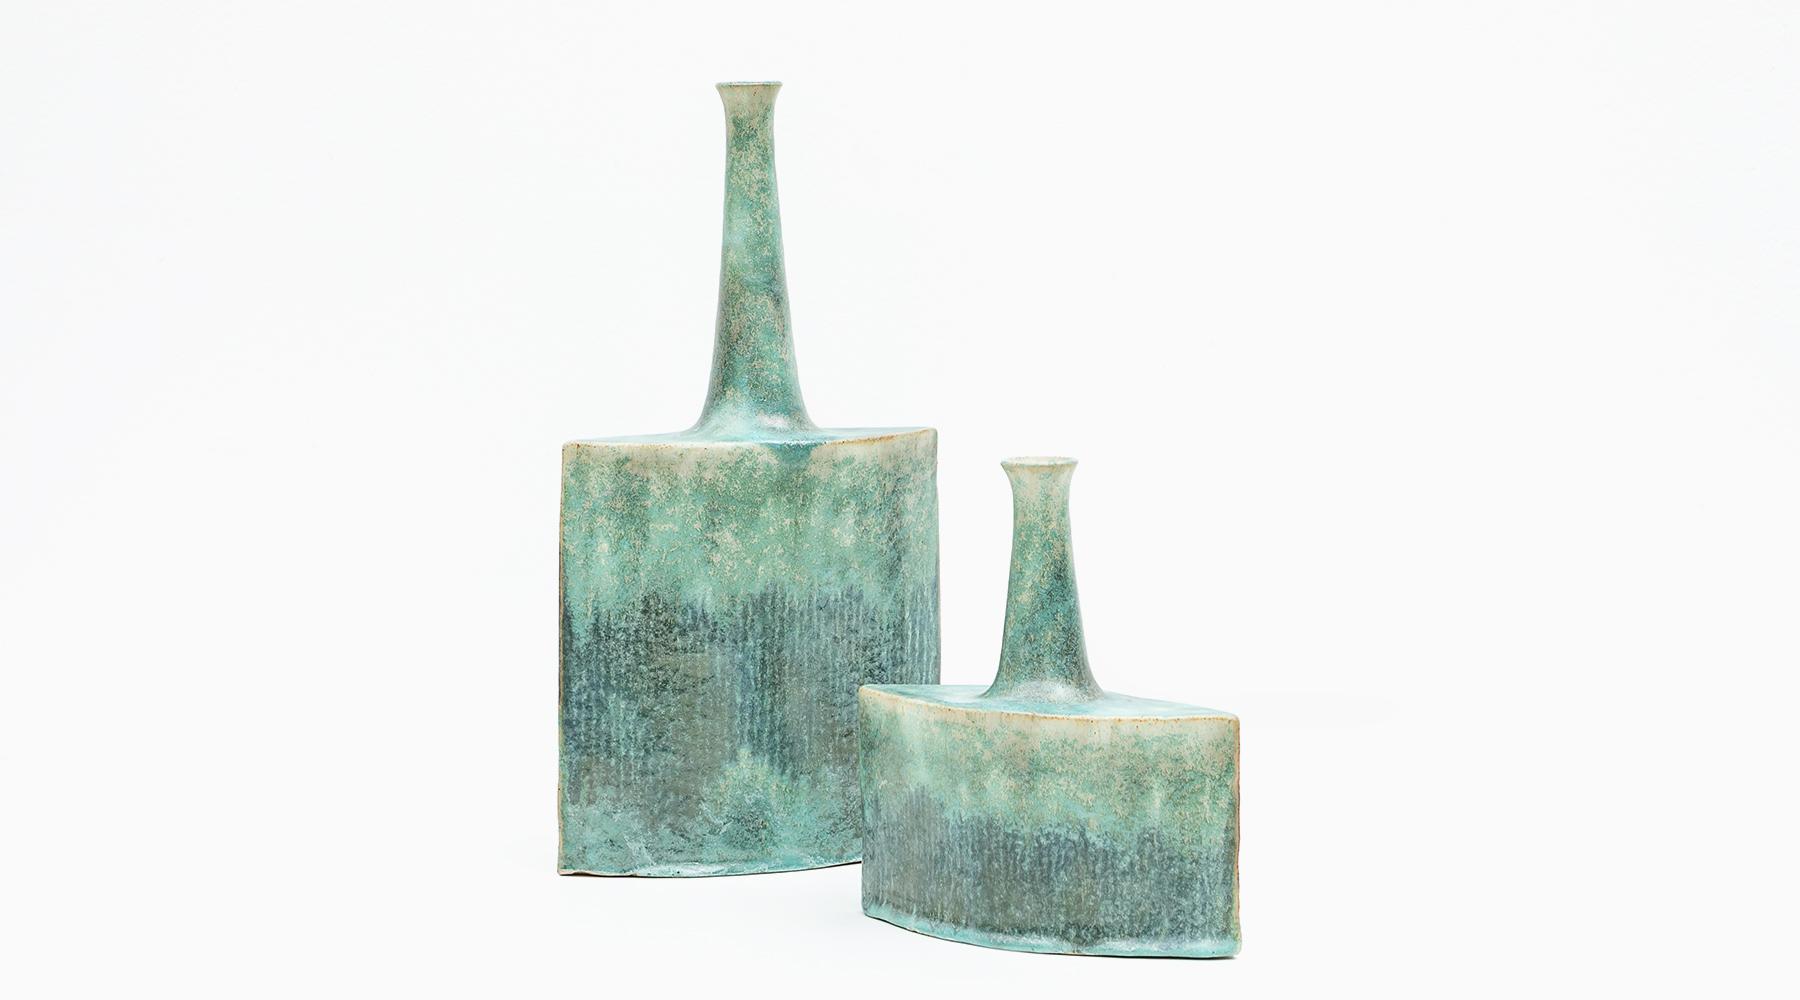 Art pottery in sea tones, set of two vases, ceramic, Bruno Gambone, Italy, 1980s.

Lovely set of two vases by the versatile artist Bruno Gambone from the 1980s, different heights but visually the same width. The ceramic objects have a narrow neck